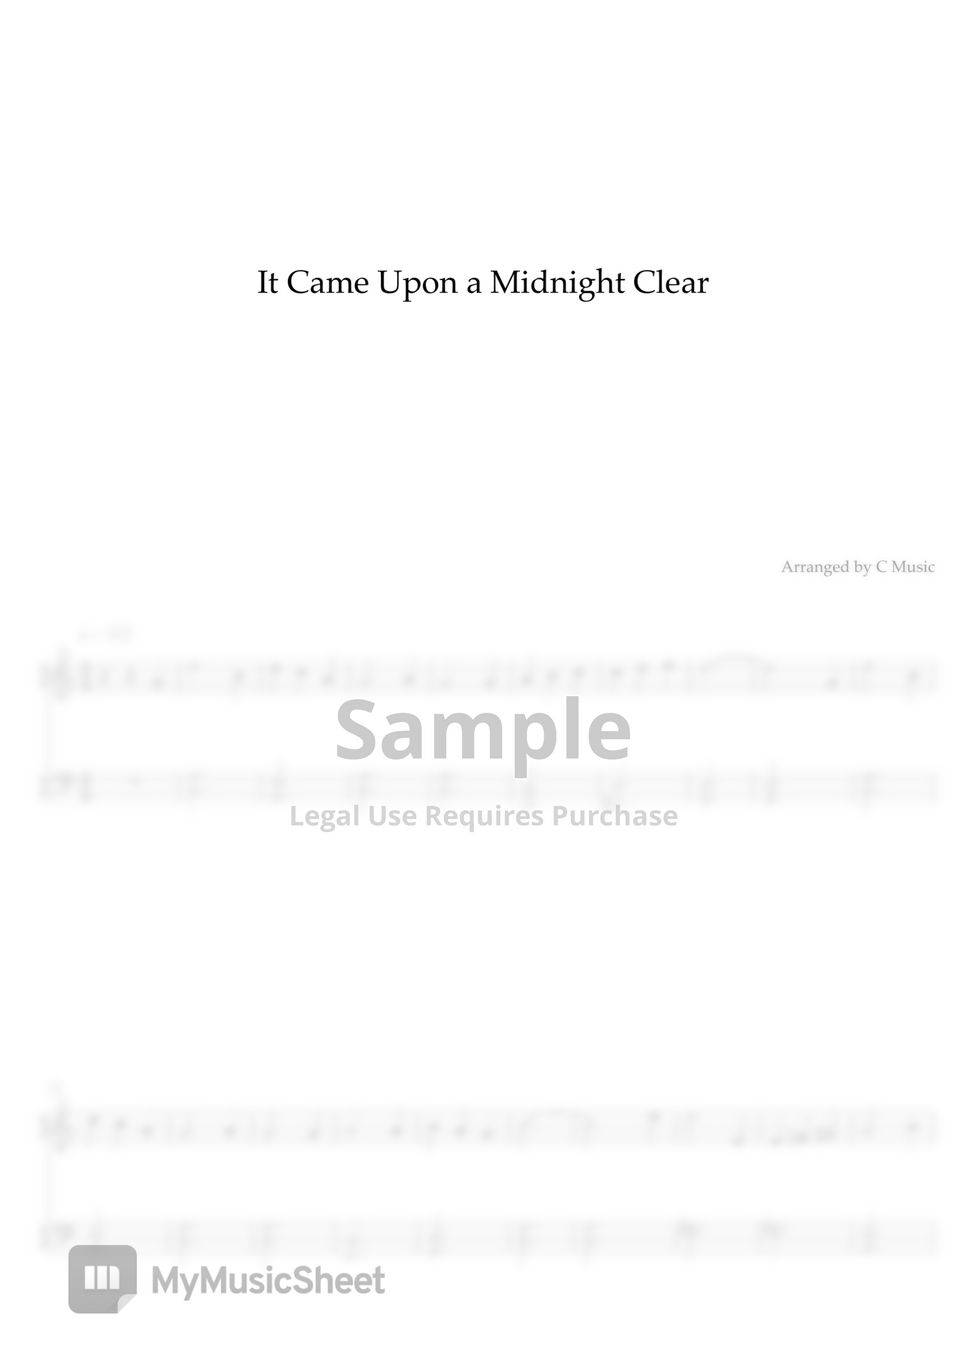 Richard Storrs Willis - It Came Upon the Midnight Clear (Easy Piano) by C Music